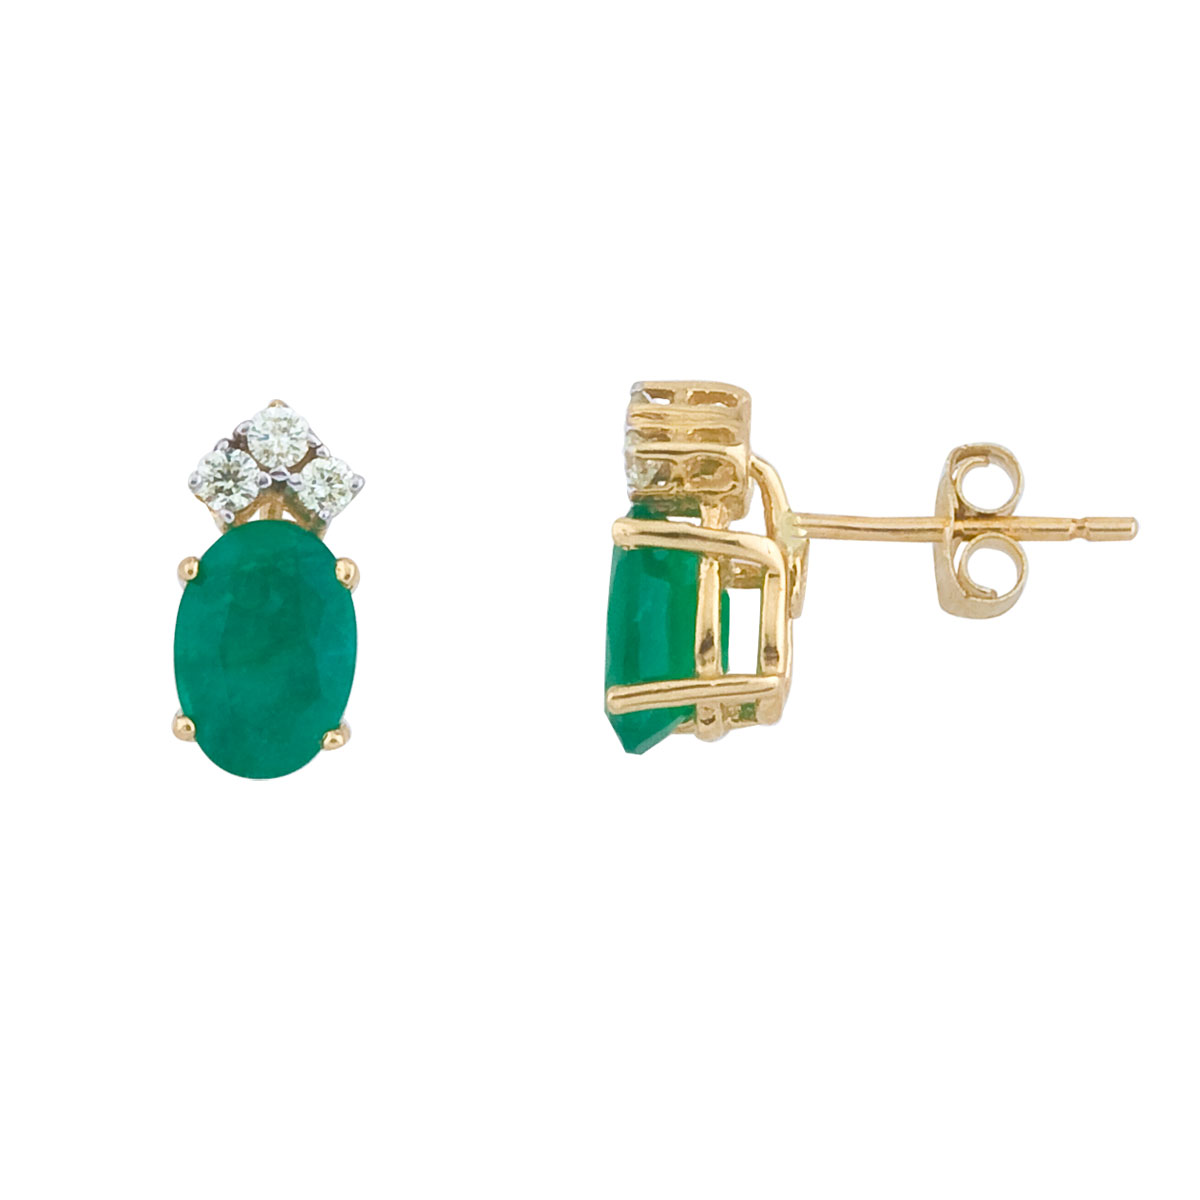 JCX2244: These 7x5 mm oval shaped emerald earrings are set in beautiful 14k yellow gold and feature .12 total carat diamonds.